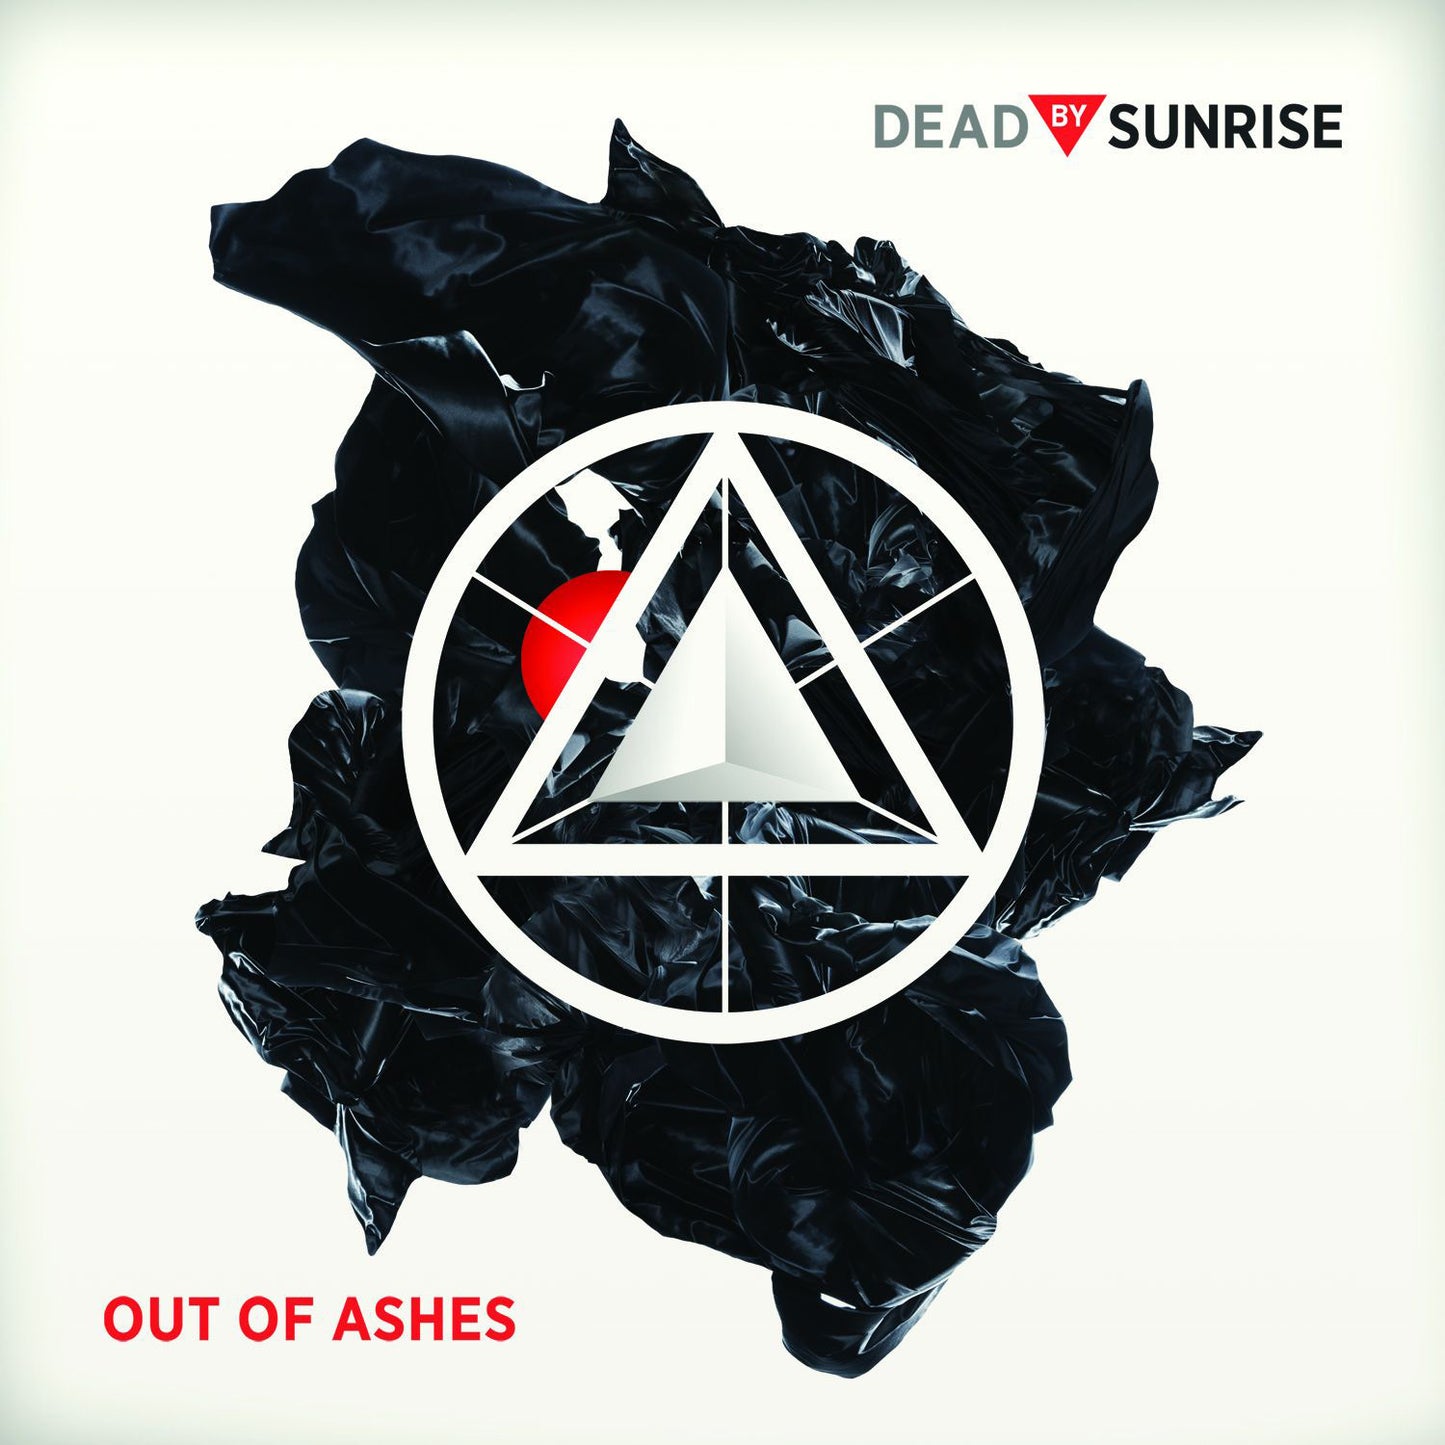 Out of Ashes - Dead By Sunrise (Black Ice Vinyl)